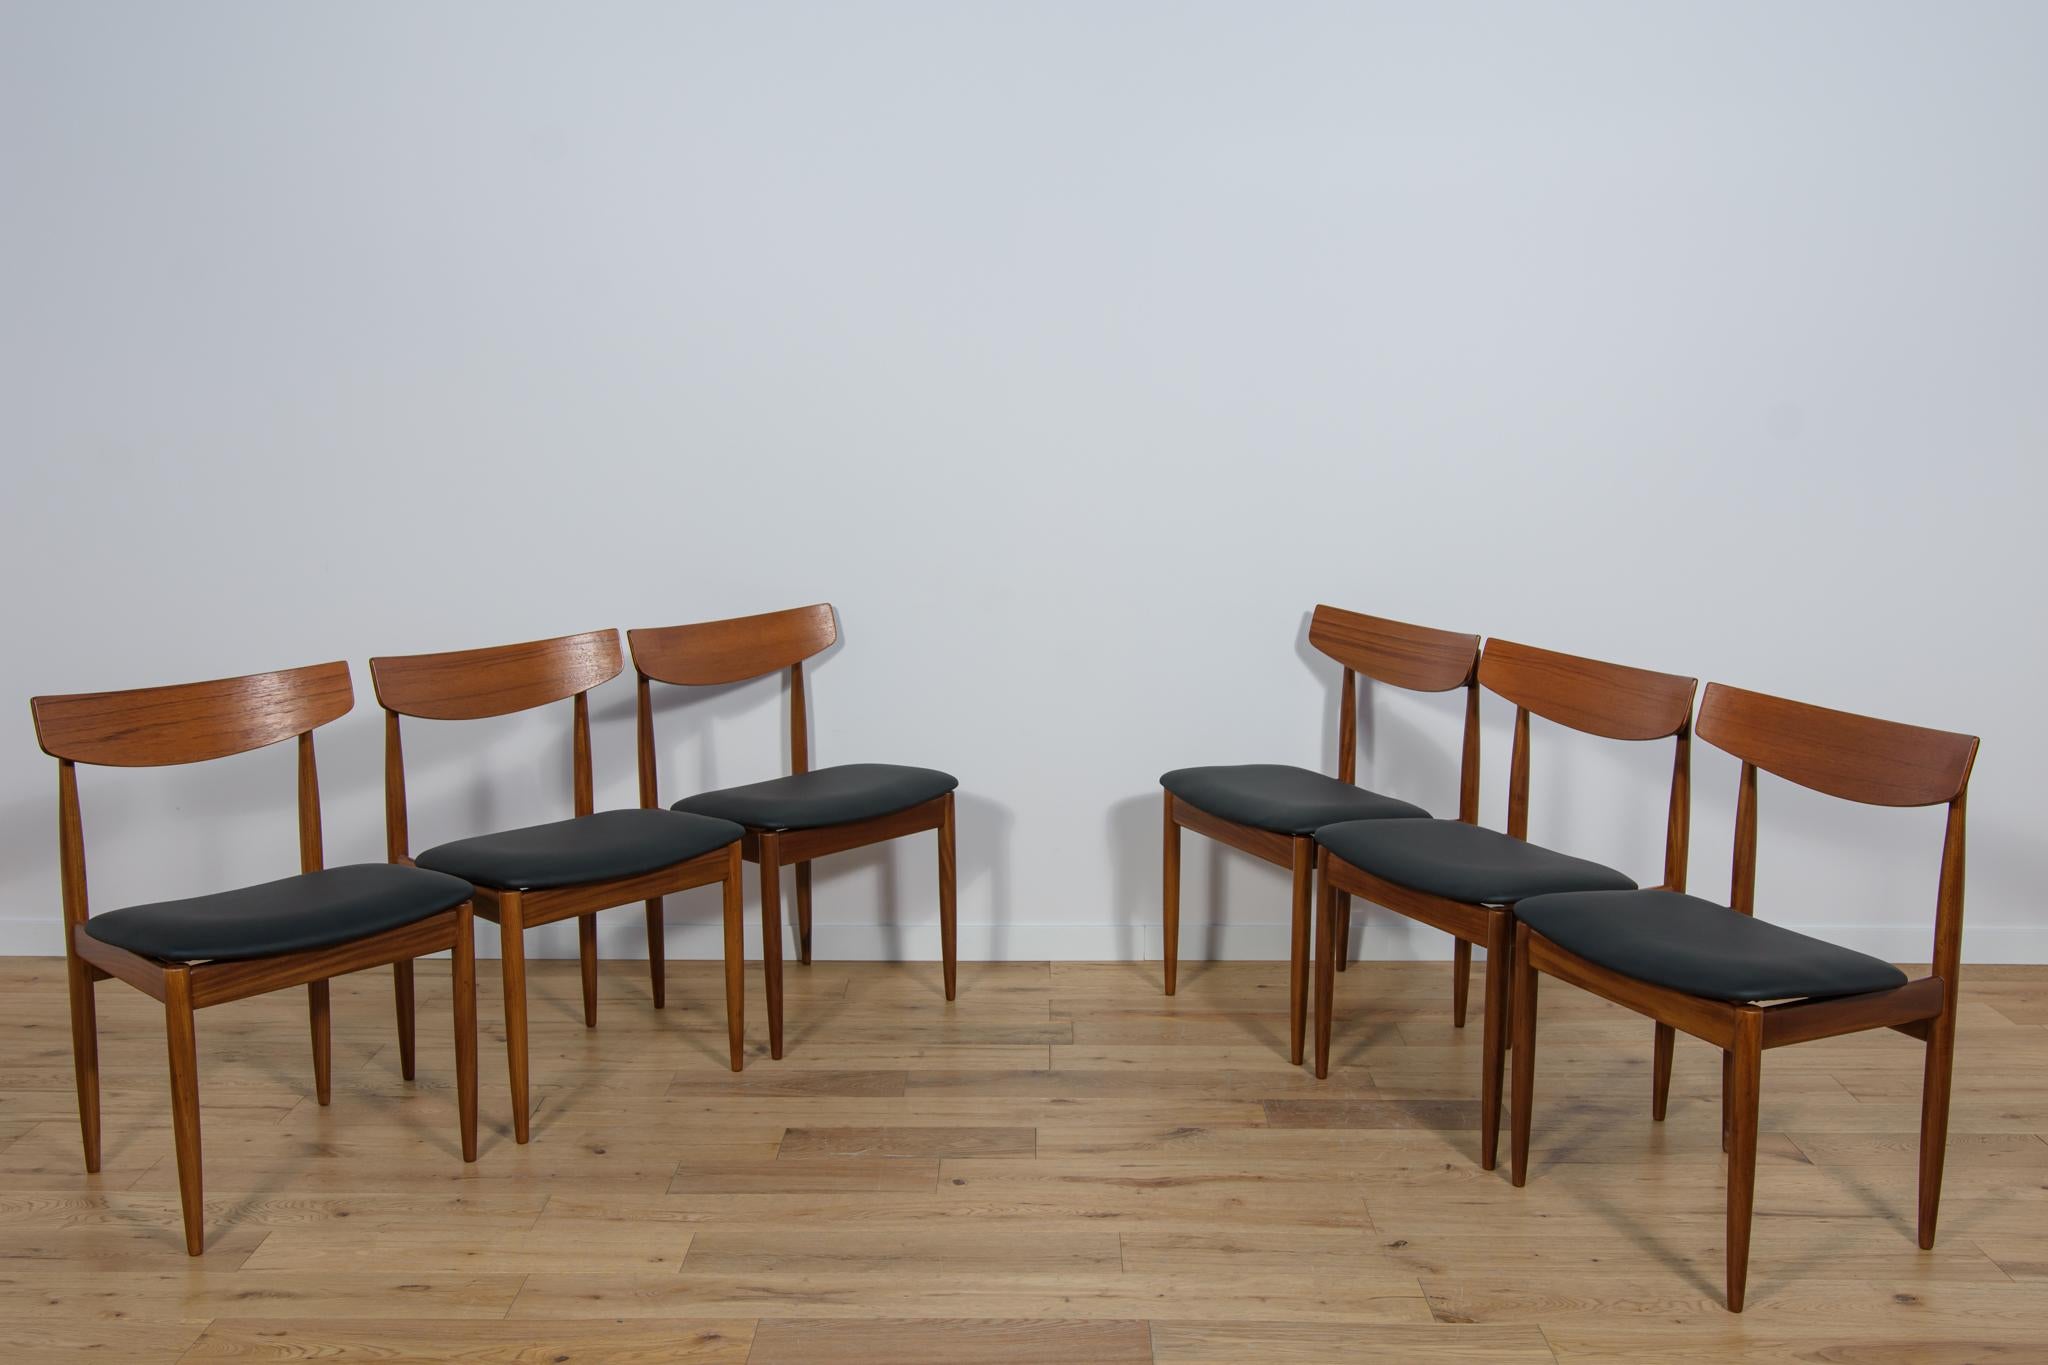 Mid-20th Century Mid-Century Dining Chairs in Teak by Ib Kofod Larsen for G-Plan, 1960s. For Sale